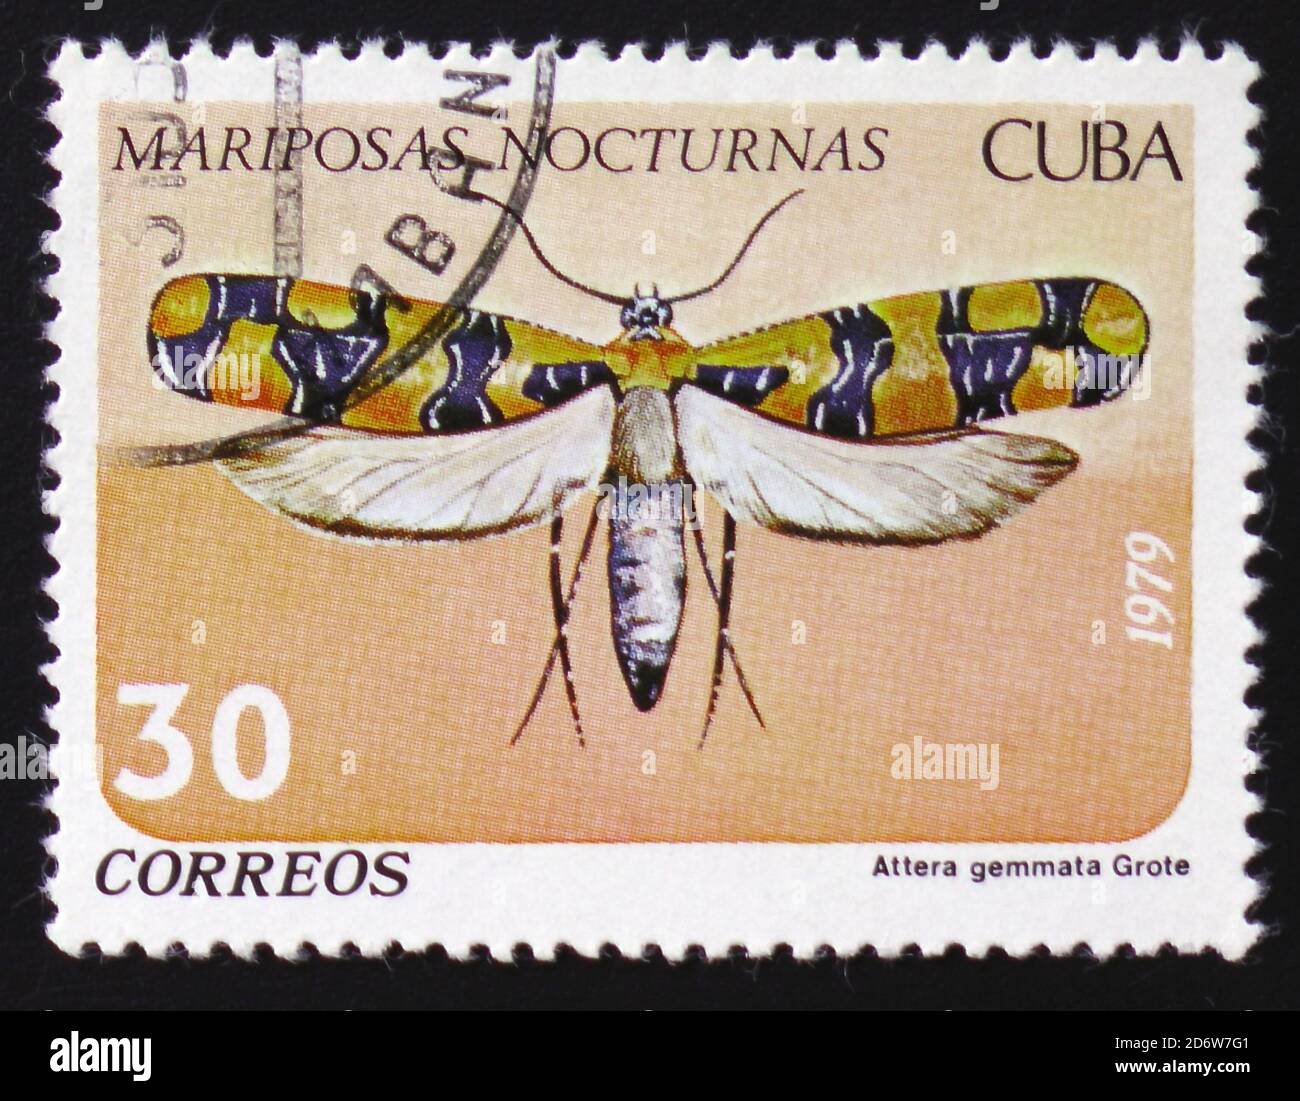 MOSCOW, RUSSIA - FEBRUARY 12, 2017: A Stamp printed in CUBA shows image of a Attera gemmata Grote butterfly (Mariposas nocturnas), circa 1979 Stock Photo